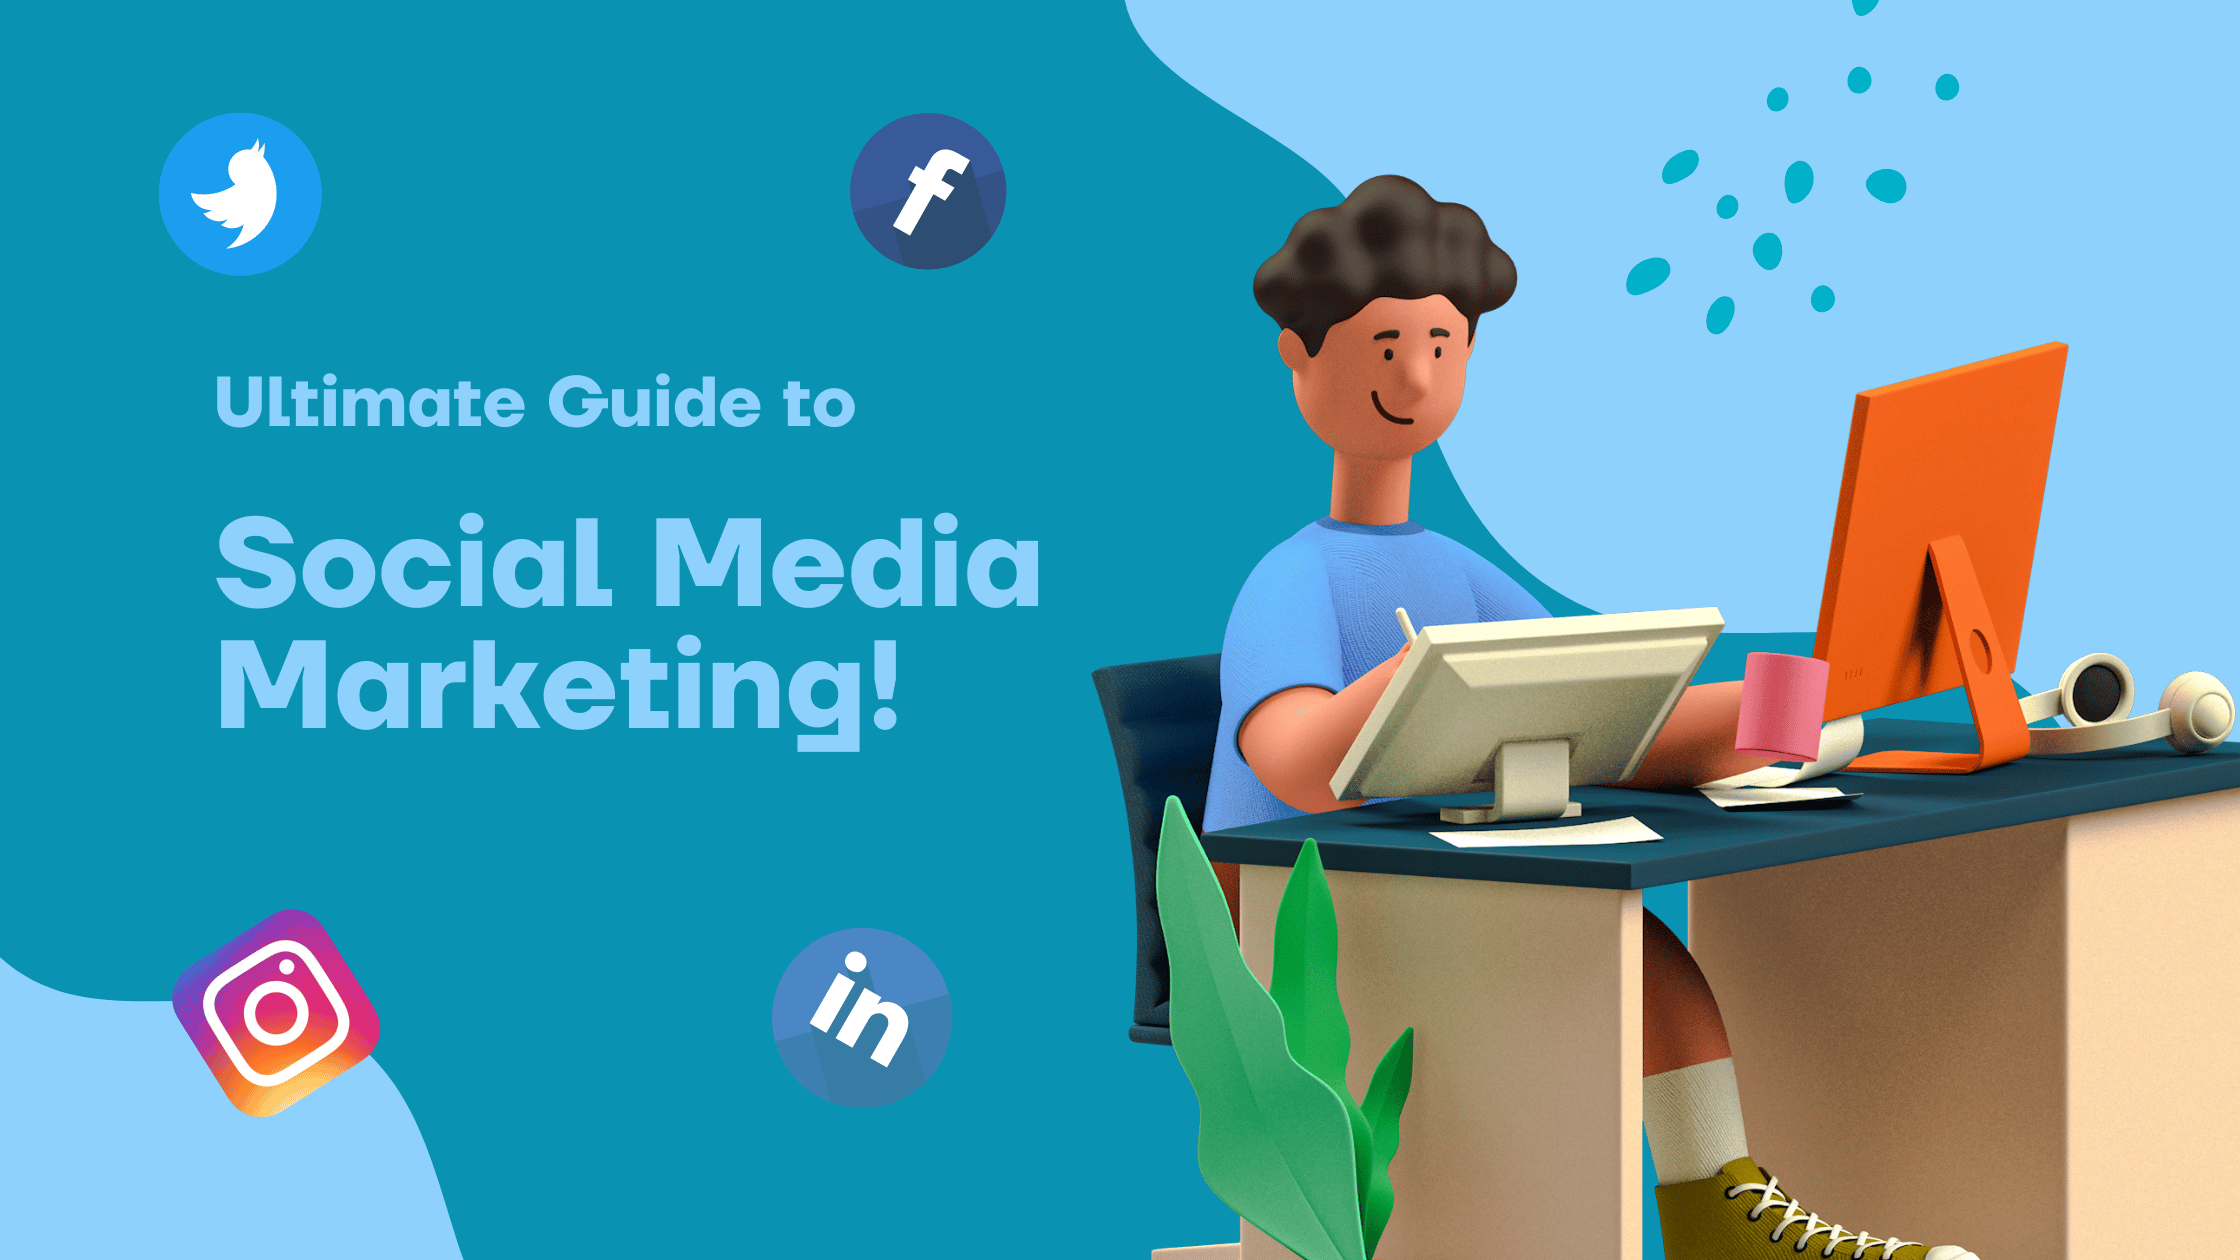 Featured image for “The Ultimate Guide to Social Media Marketing for Small & Medium Businesses”